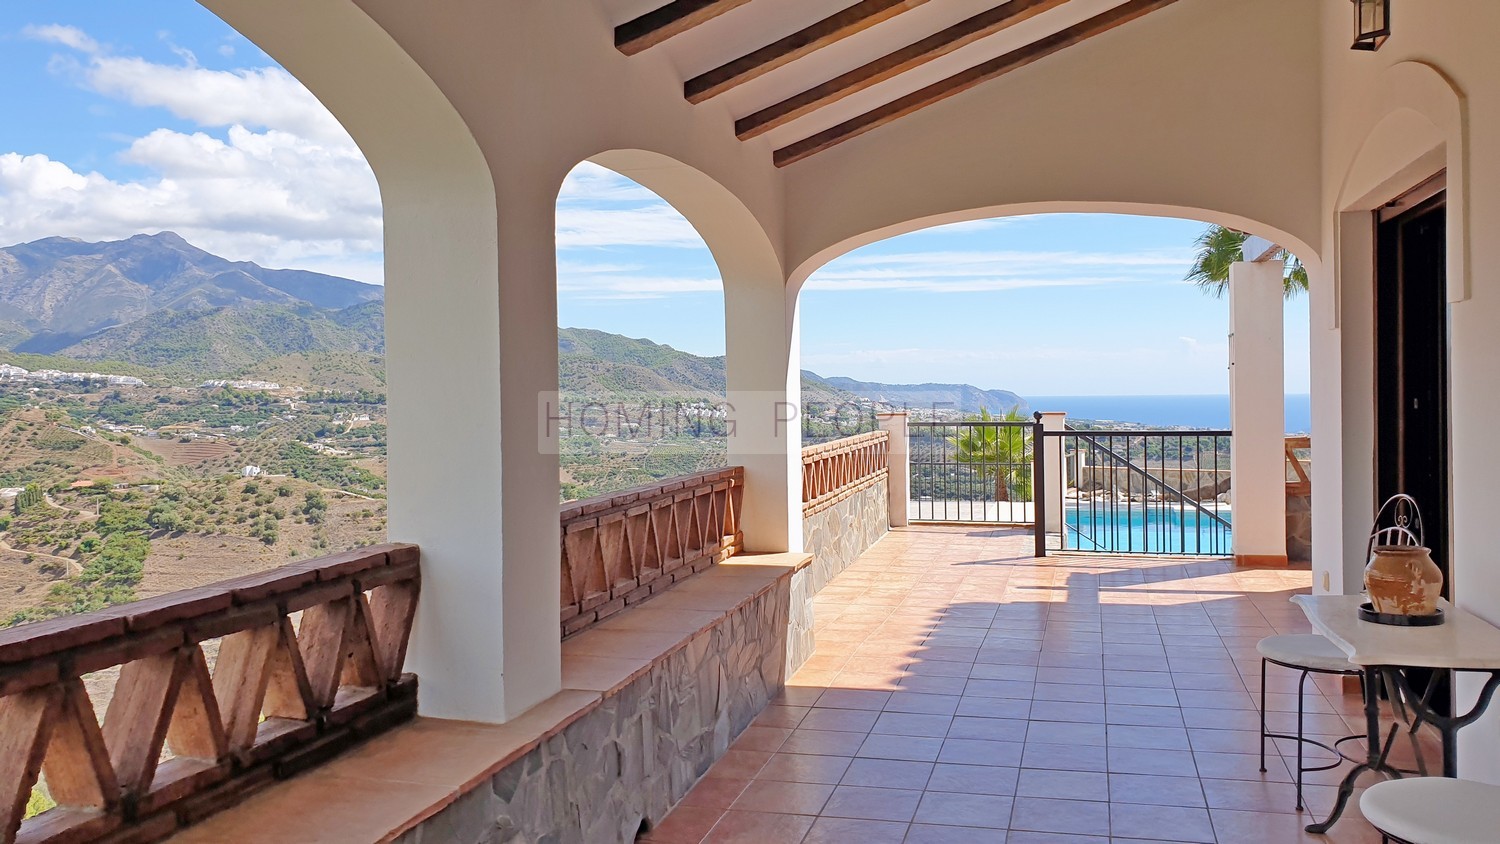 RENTED OUT: Large country villa with pool and sea views